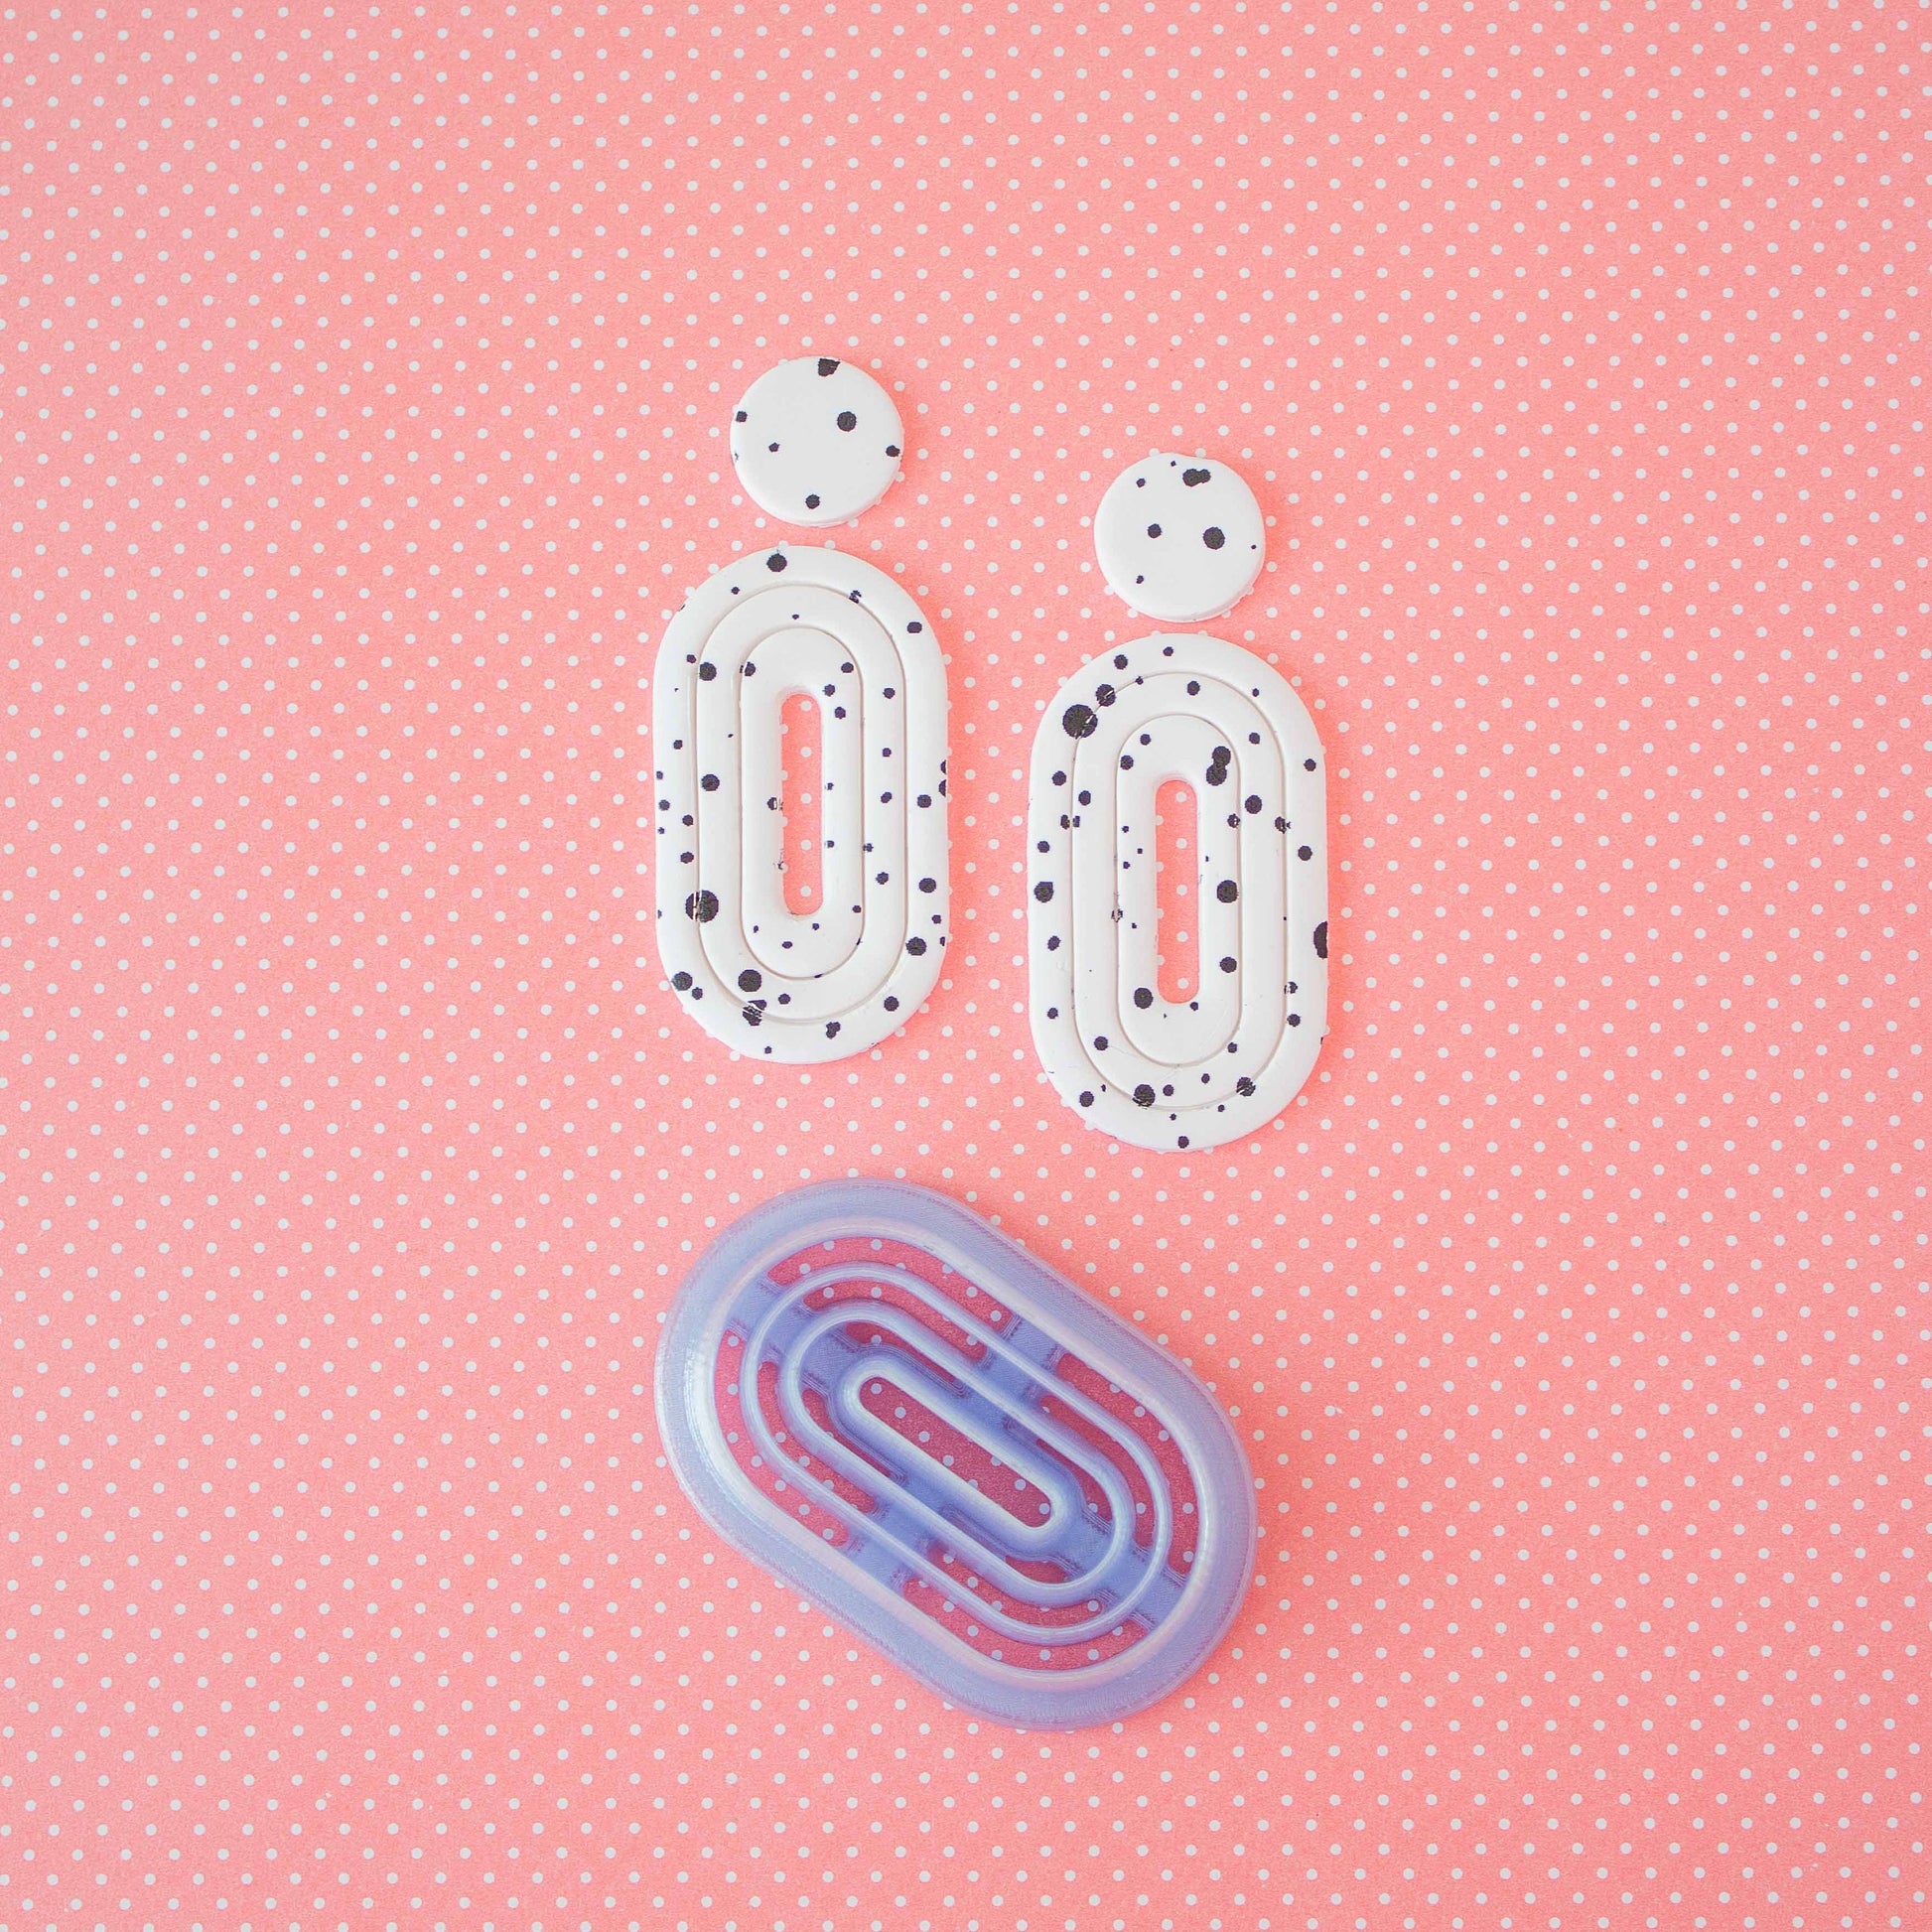 Donut cutter and 2 donut polymer clay earrings on a pink background.